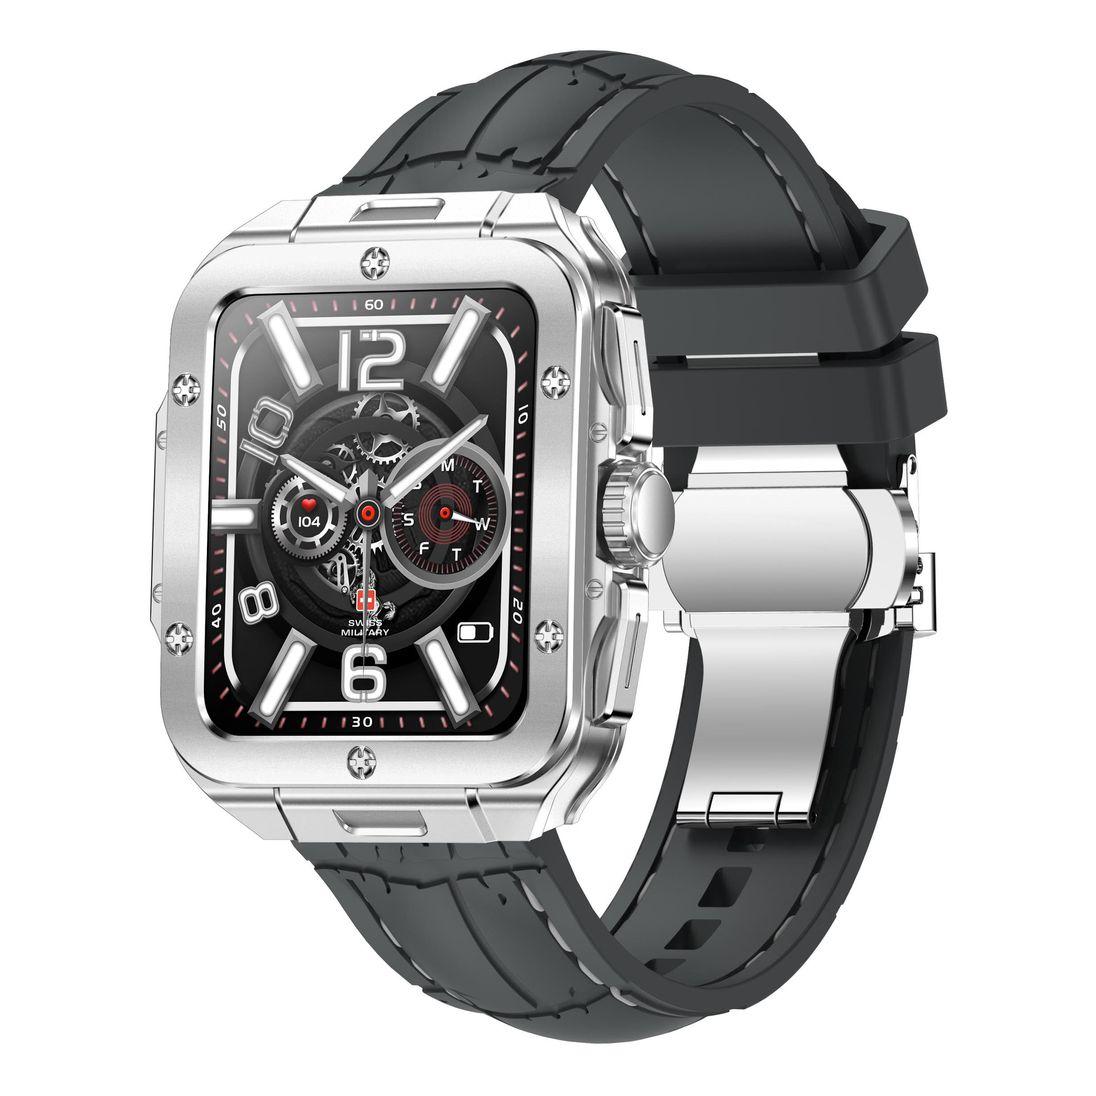 Swiss Military Alps 2 Smartwatch with Silver Frame and Grey Silicon Strap - фото 1 - id-p115279043